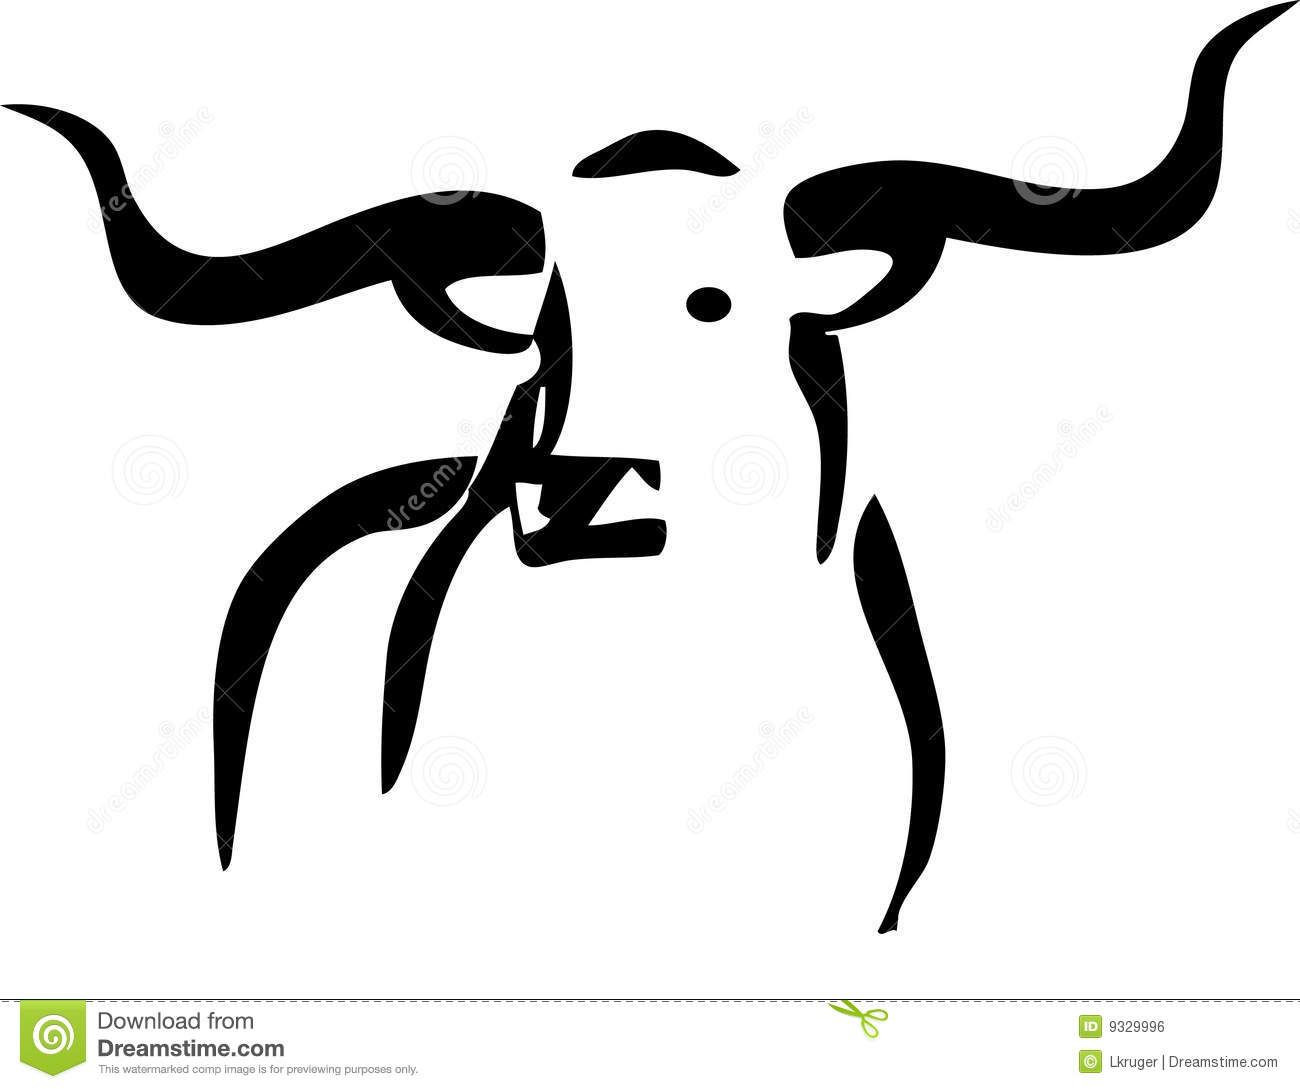 Thekindproject skull standing in. Cattle clipart longhorn cattle